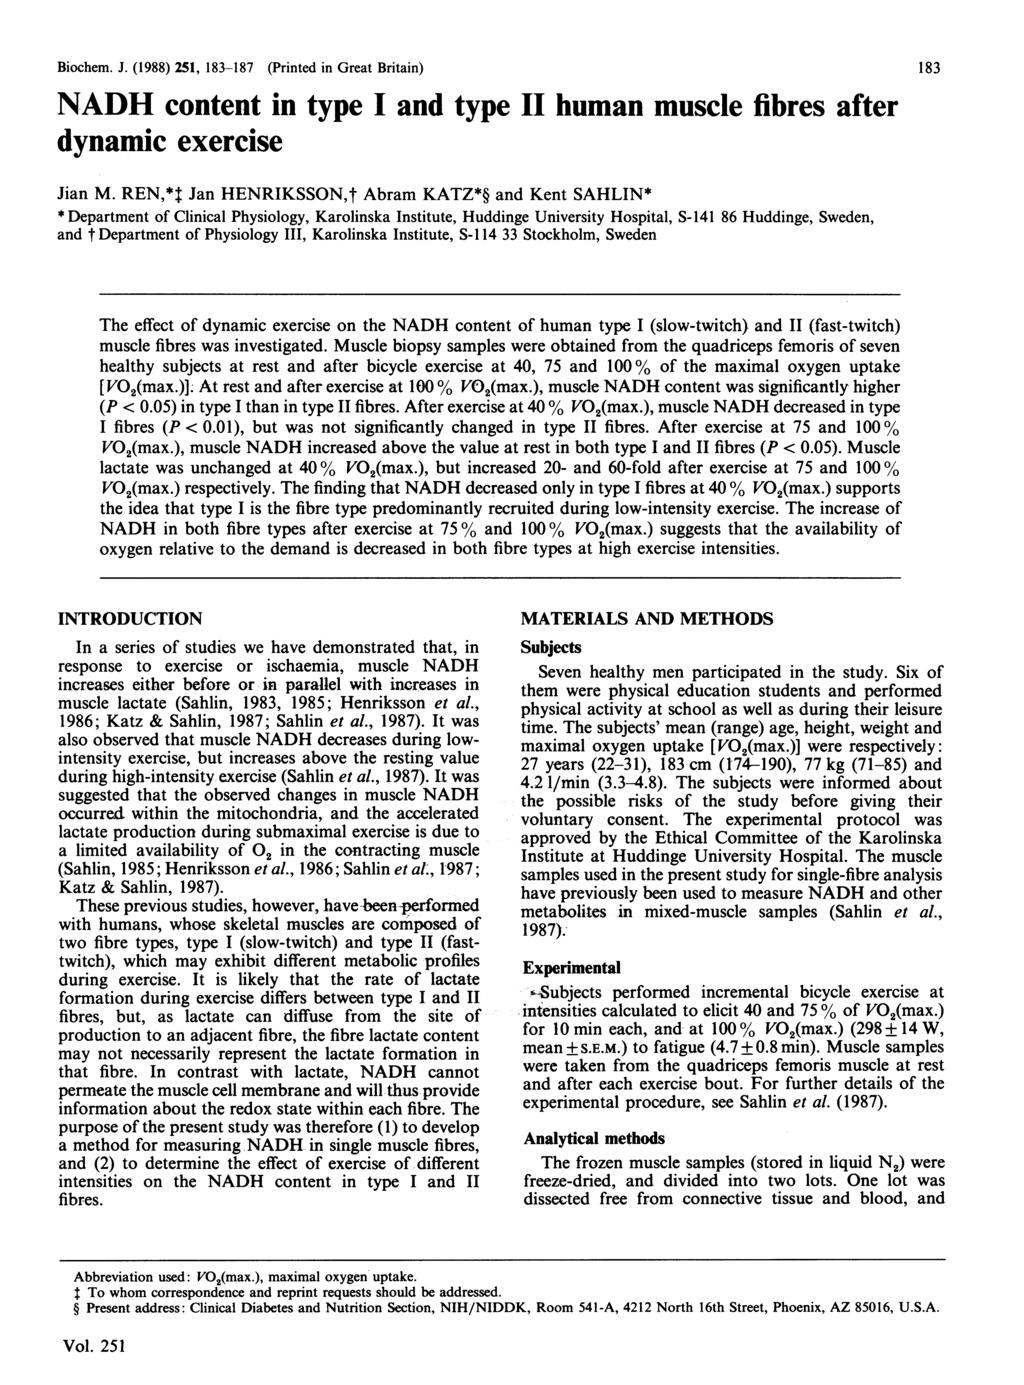 Biochem. J. (1988) 251, 183-187 (Printed in Great Britain) NADH content in type I and type II human muscle fibres after dynamic exercise 183 Jian M.